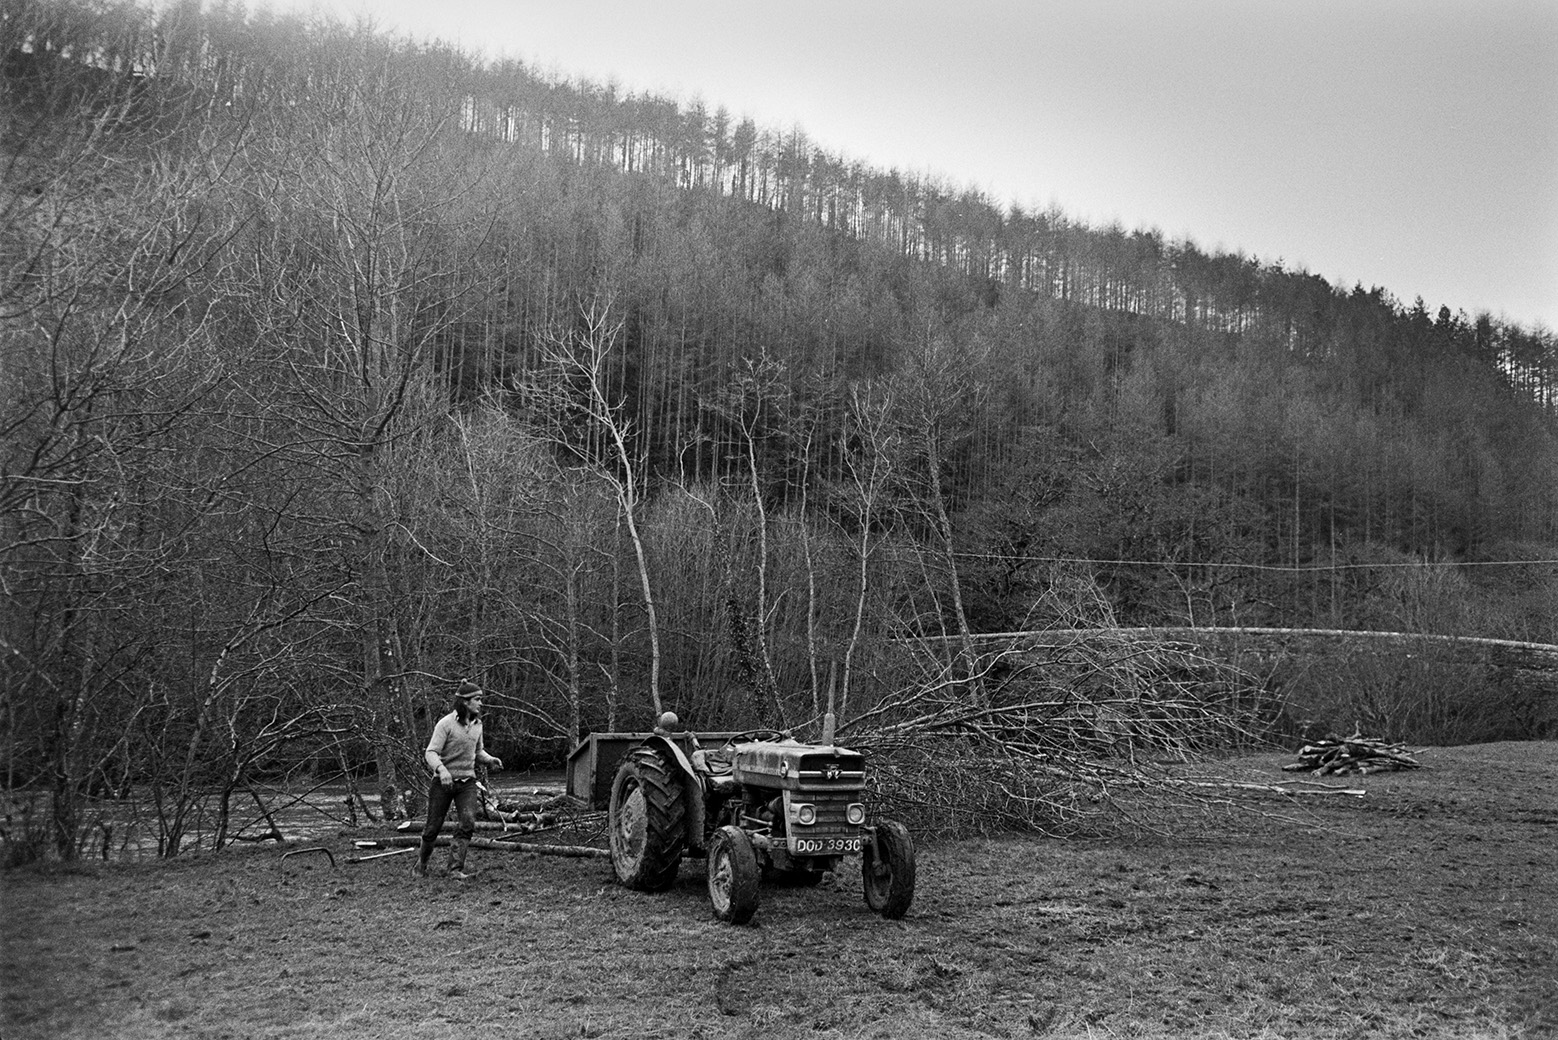 Derek Bright using a tractor and link box to transport felled trees in a field by the River Torridge at Mill Road Farm, Beaford. Beaford Bridge is visible in the background by woodland. The farm was also known as Jeffrys.